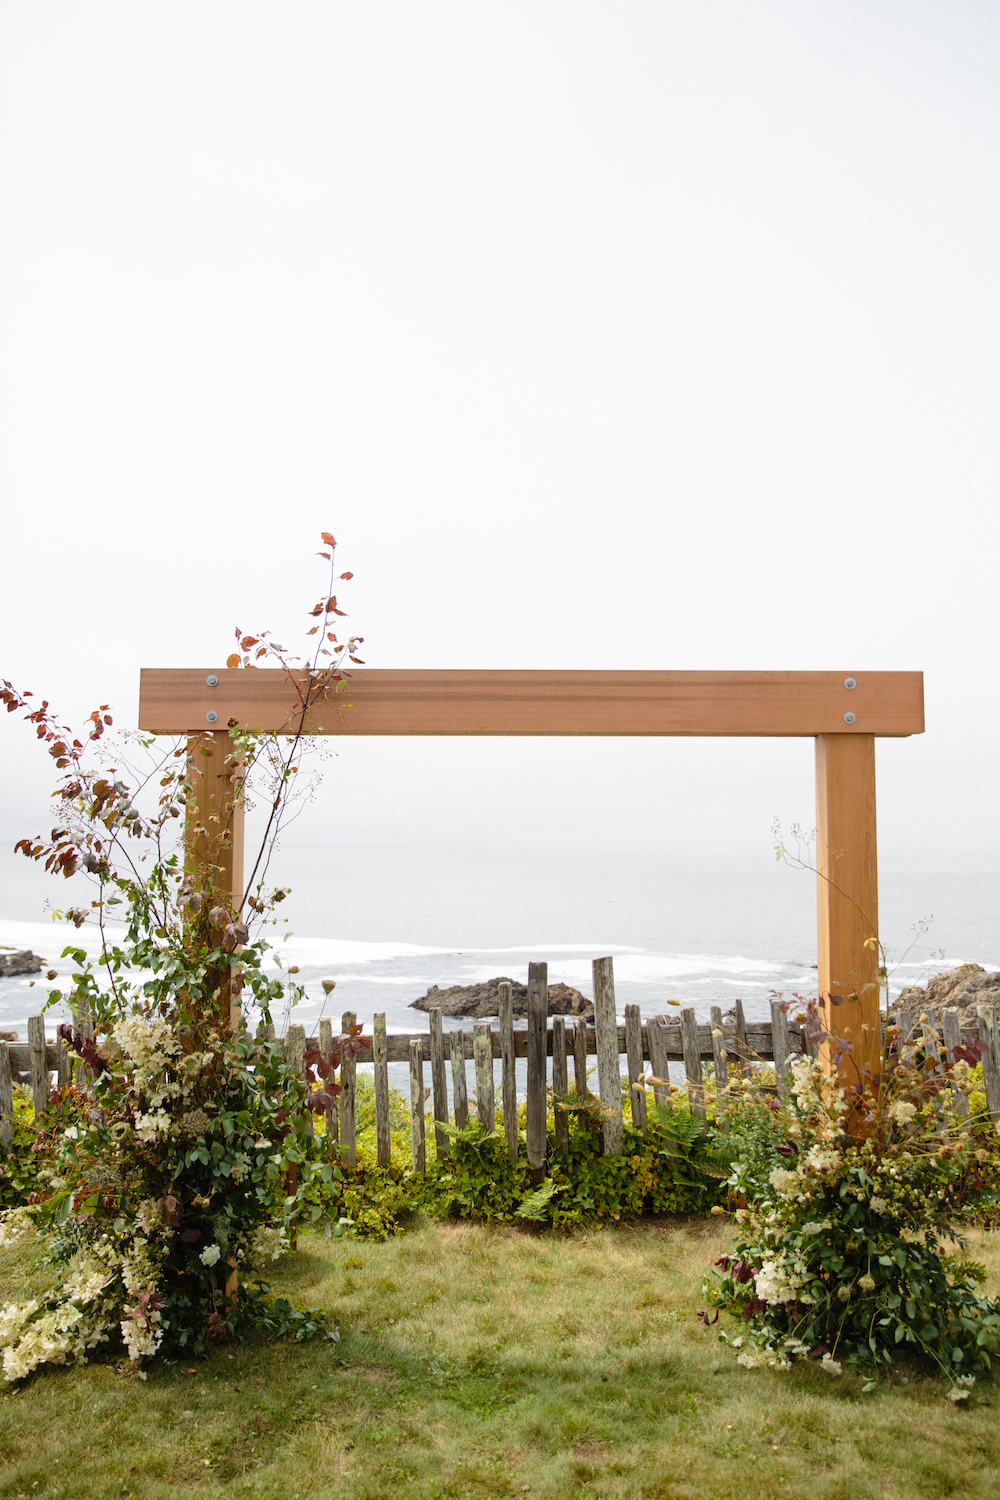  Our architect groom built this arbor, framing the iconic California coast at Sea Ranch.  Photo by Larissa Cleveland.  Event Design by DALD Events. 